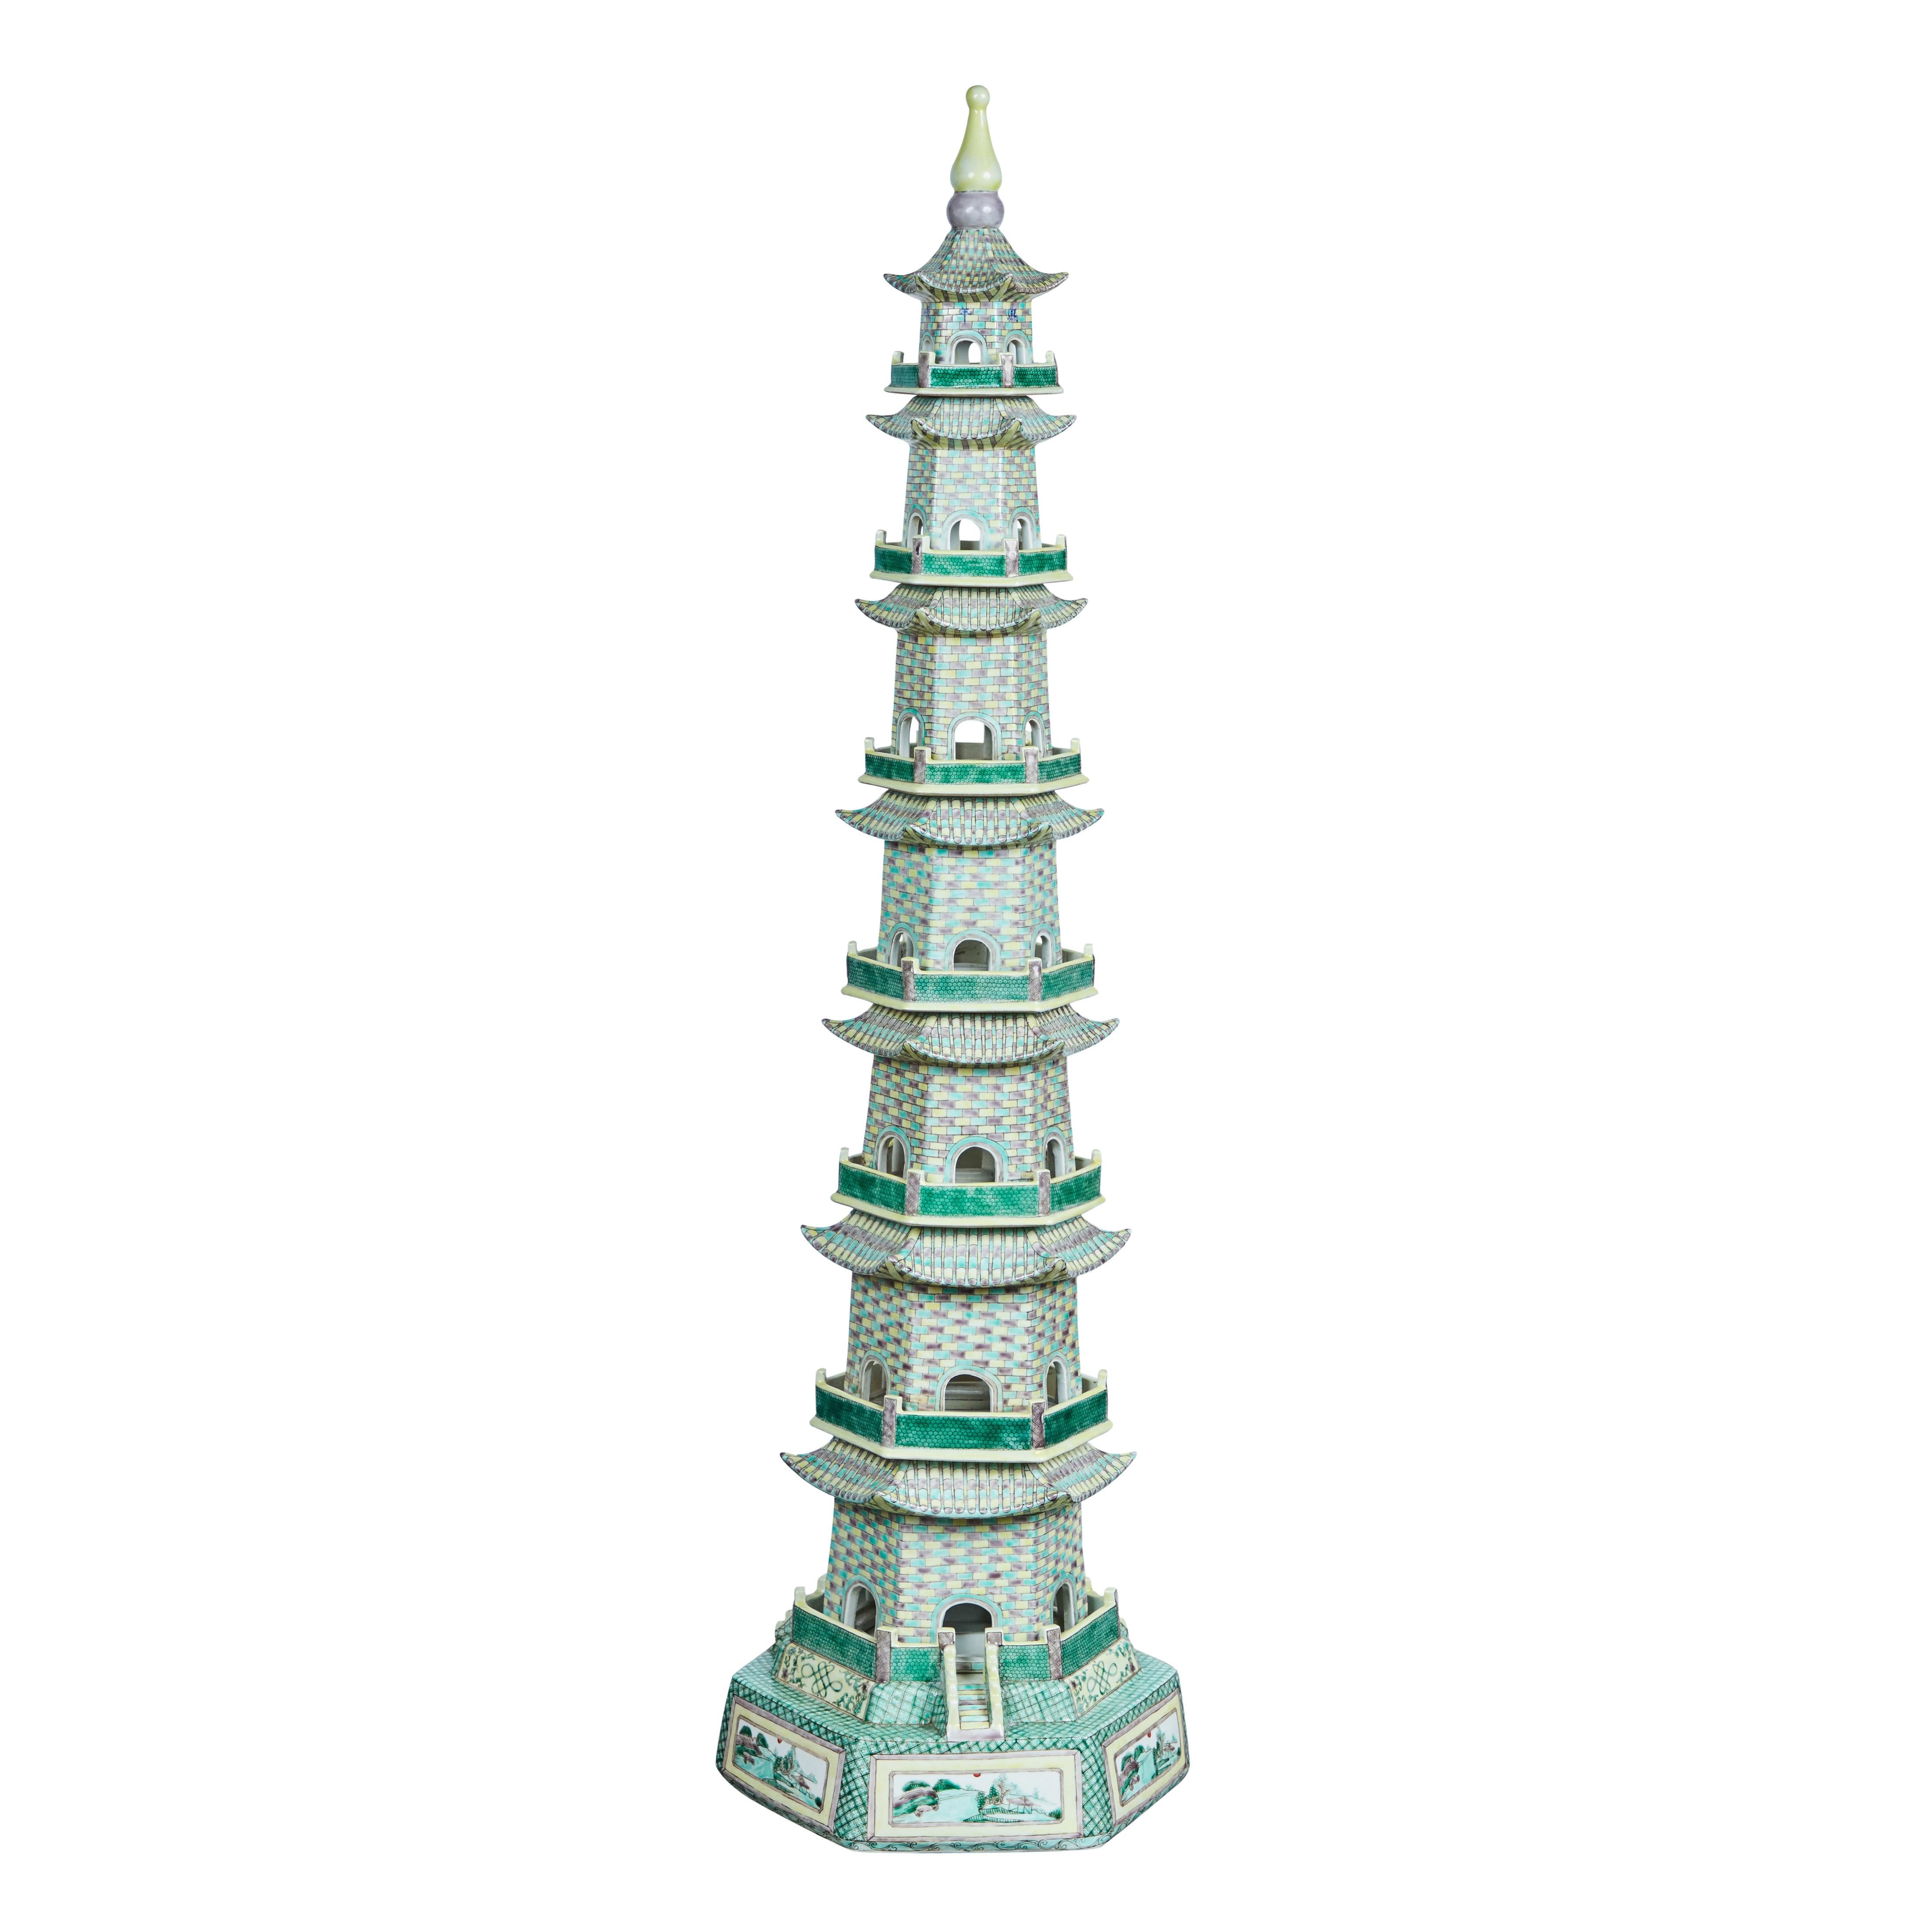 A pair of 6 sided, seven-tier, hand-painted porcelain pagodas in greens and pastels on a bases decorated with a landscape scene.
Each section is an individual piece.